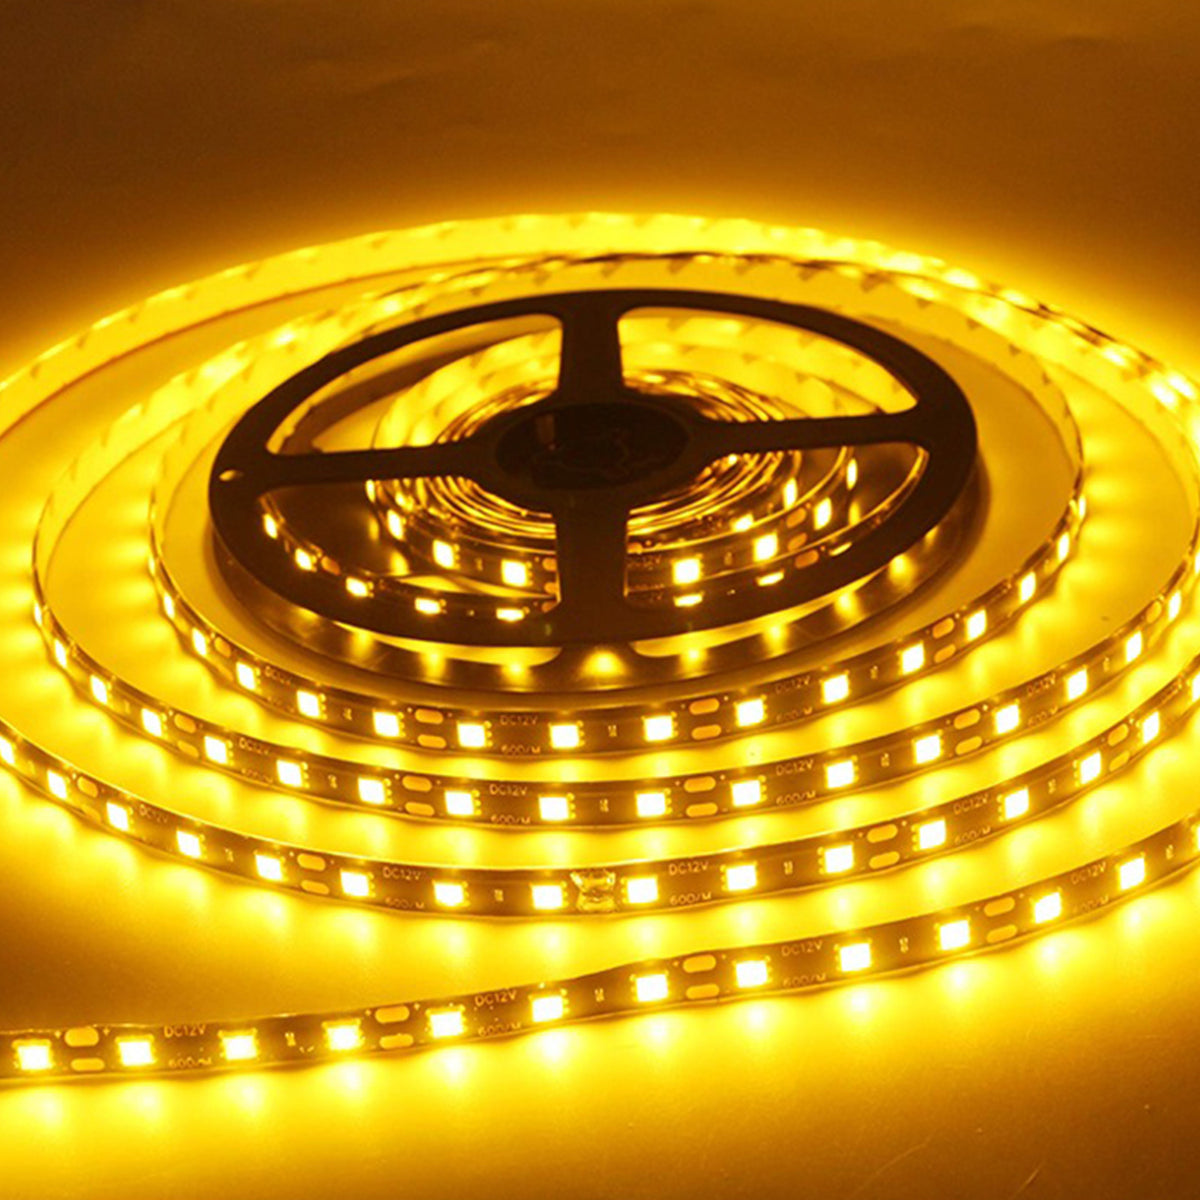 DecorTwist LEDs 5 m Strip Lights (Pack of 1) | Indoor & Outdoor Decorative | 120 LED/Mtr with Adaptor (Yellow)